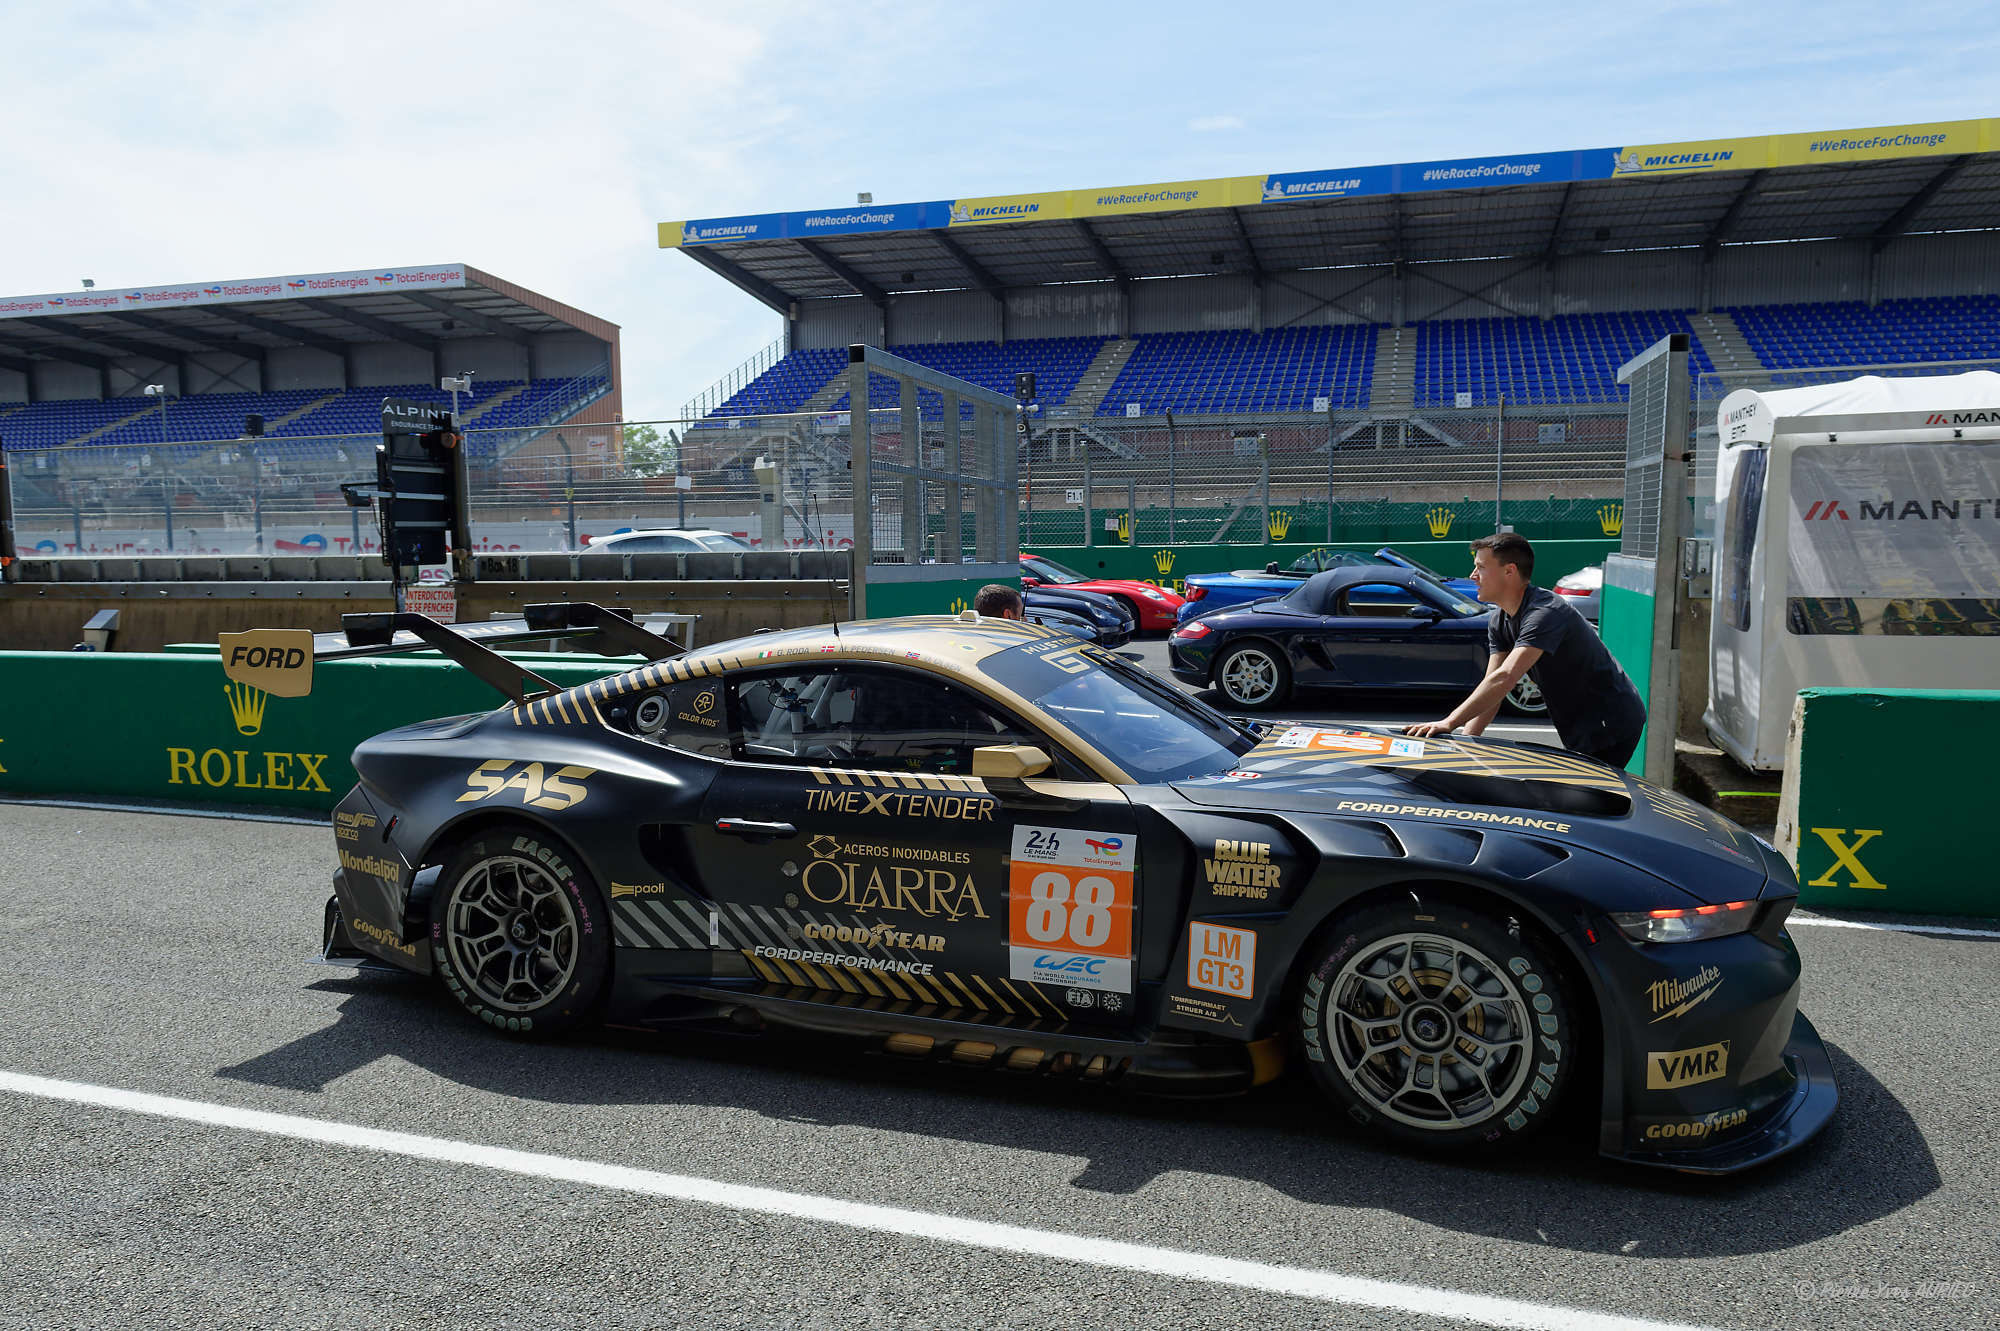 LeMans-2024 #88 Ford Mustang img3750